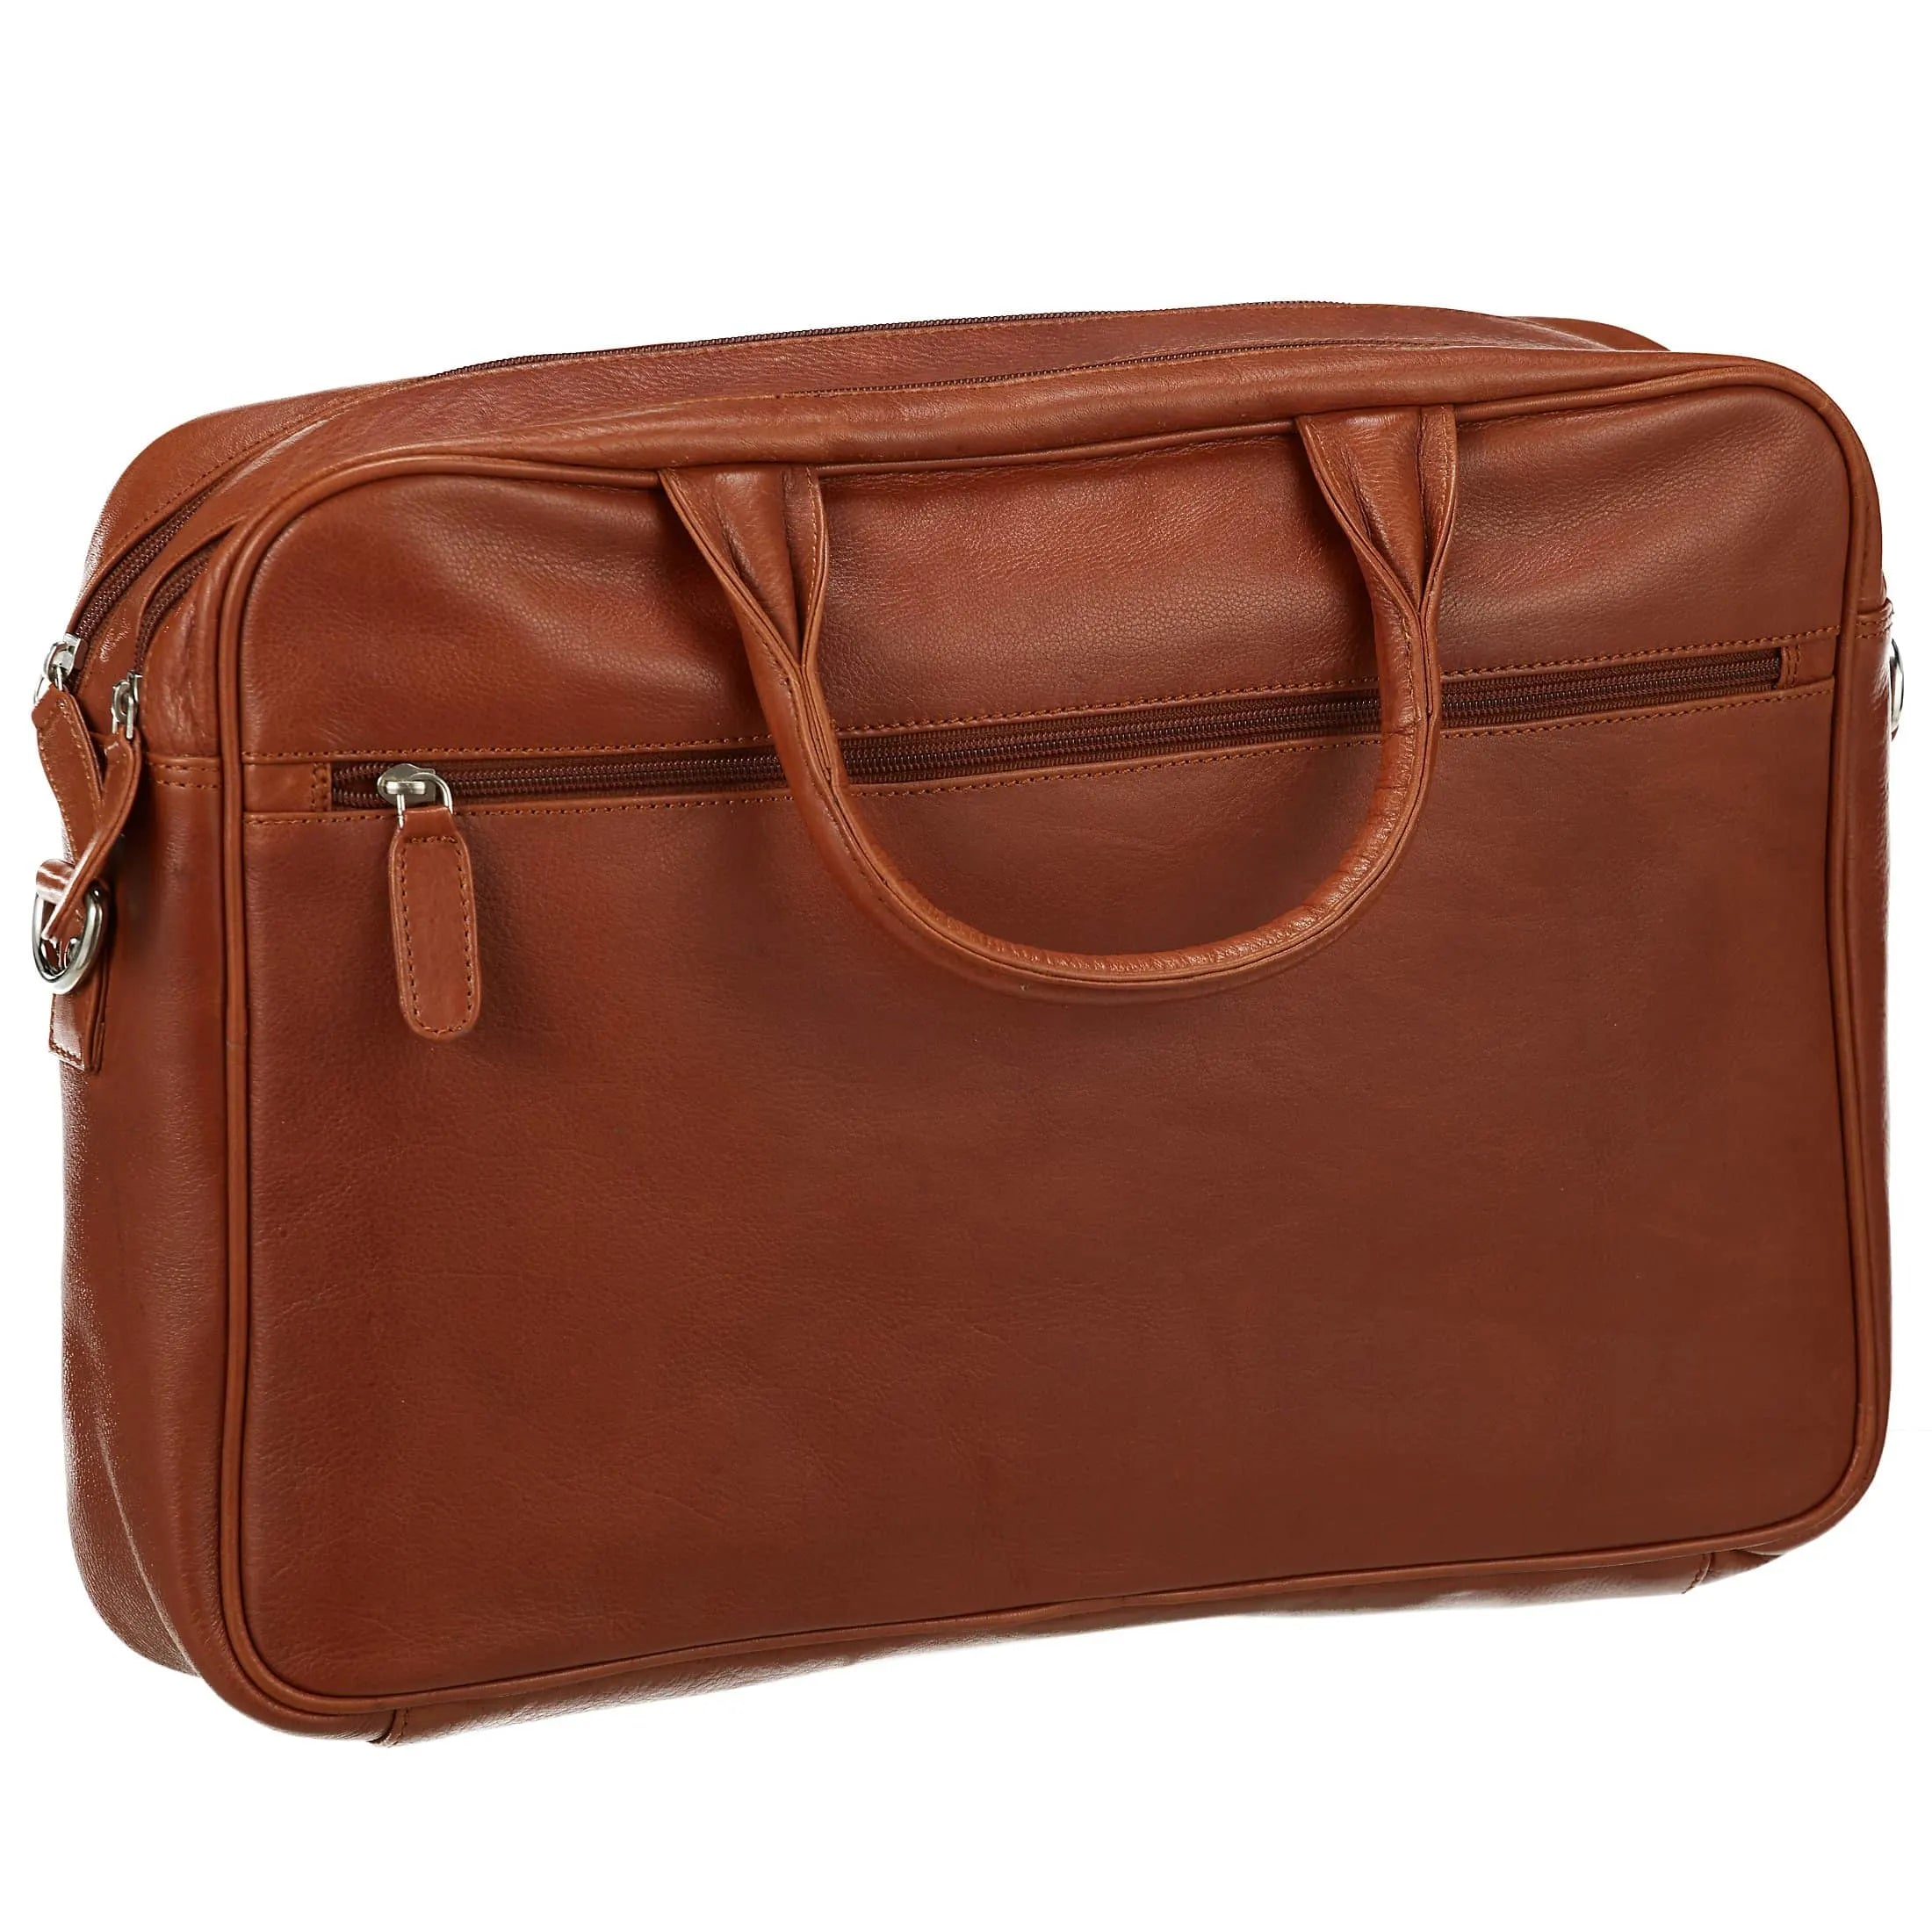 Dermata Business briefcase with laptop compartment 41 cm - Brown